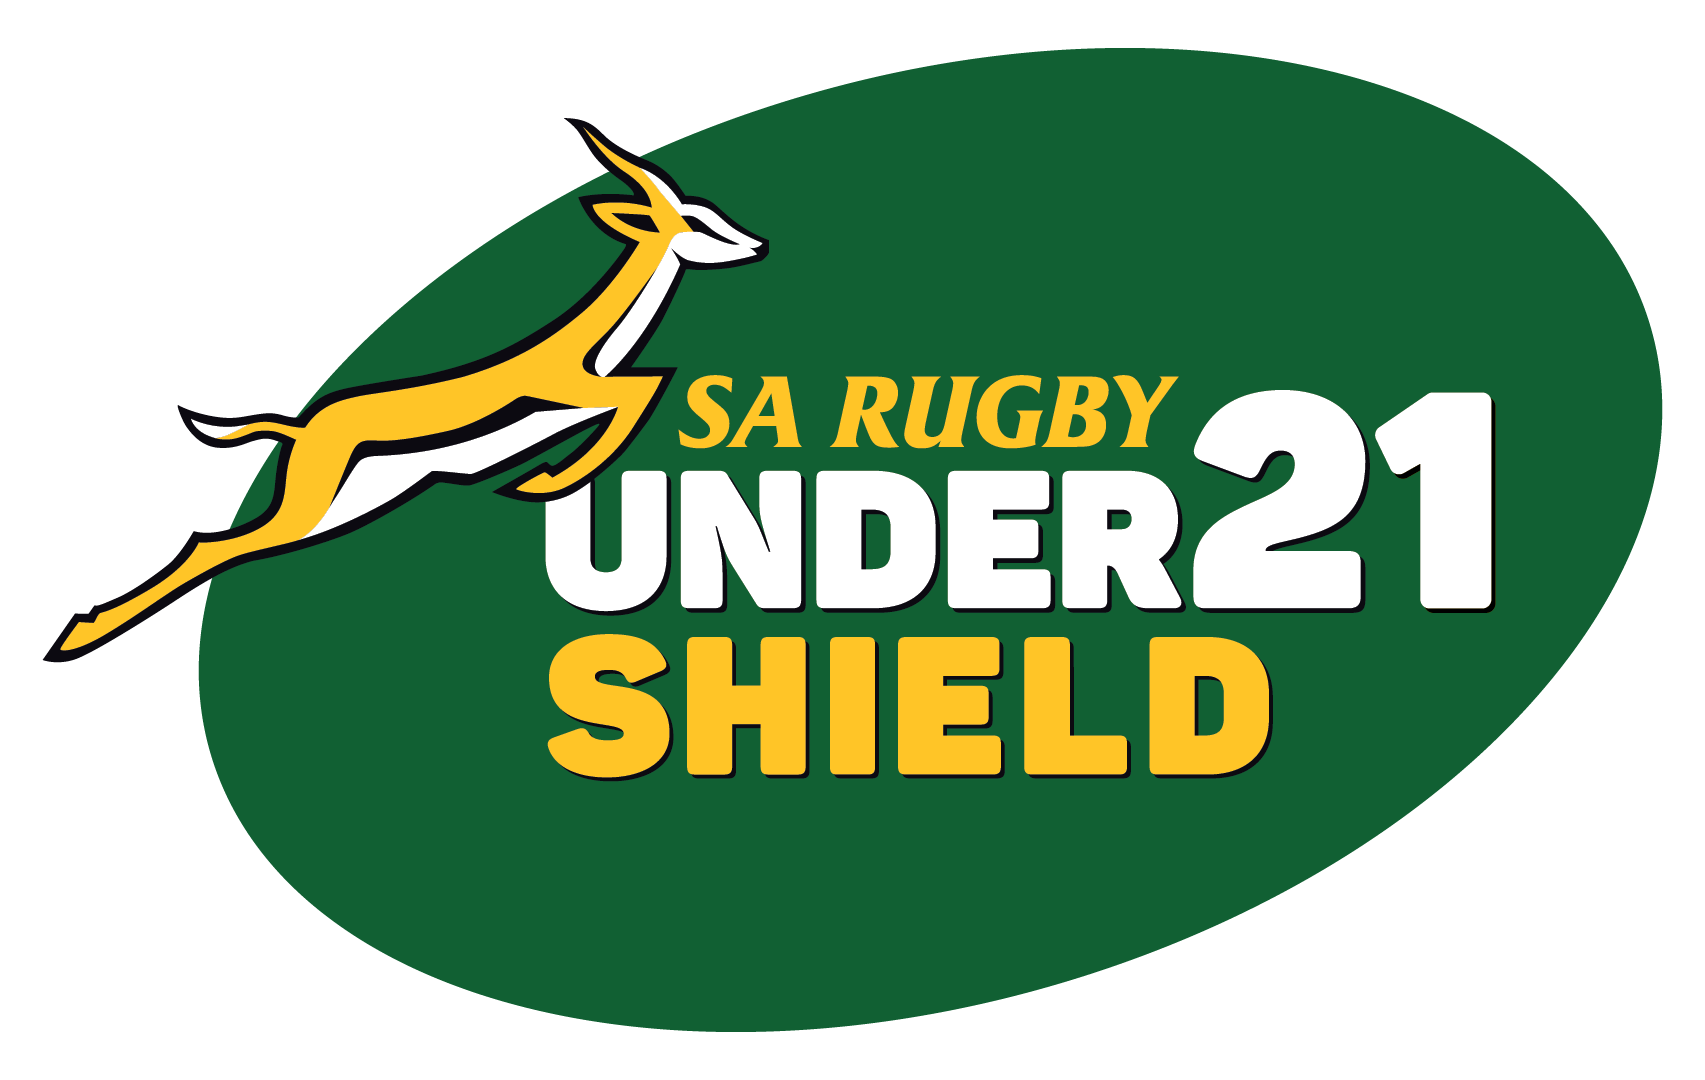 SA RUGBY UNDER-21 SHIELD